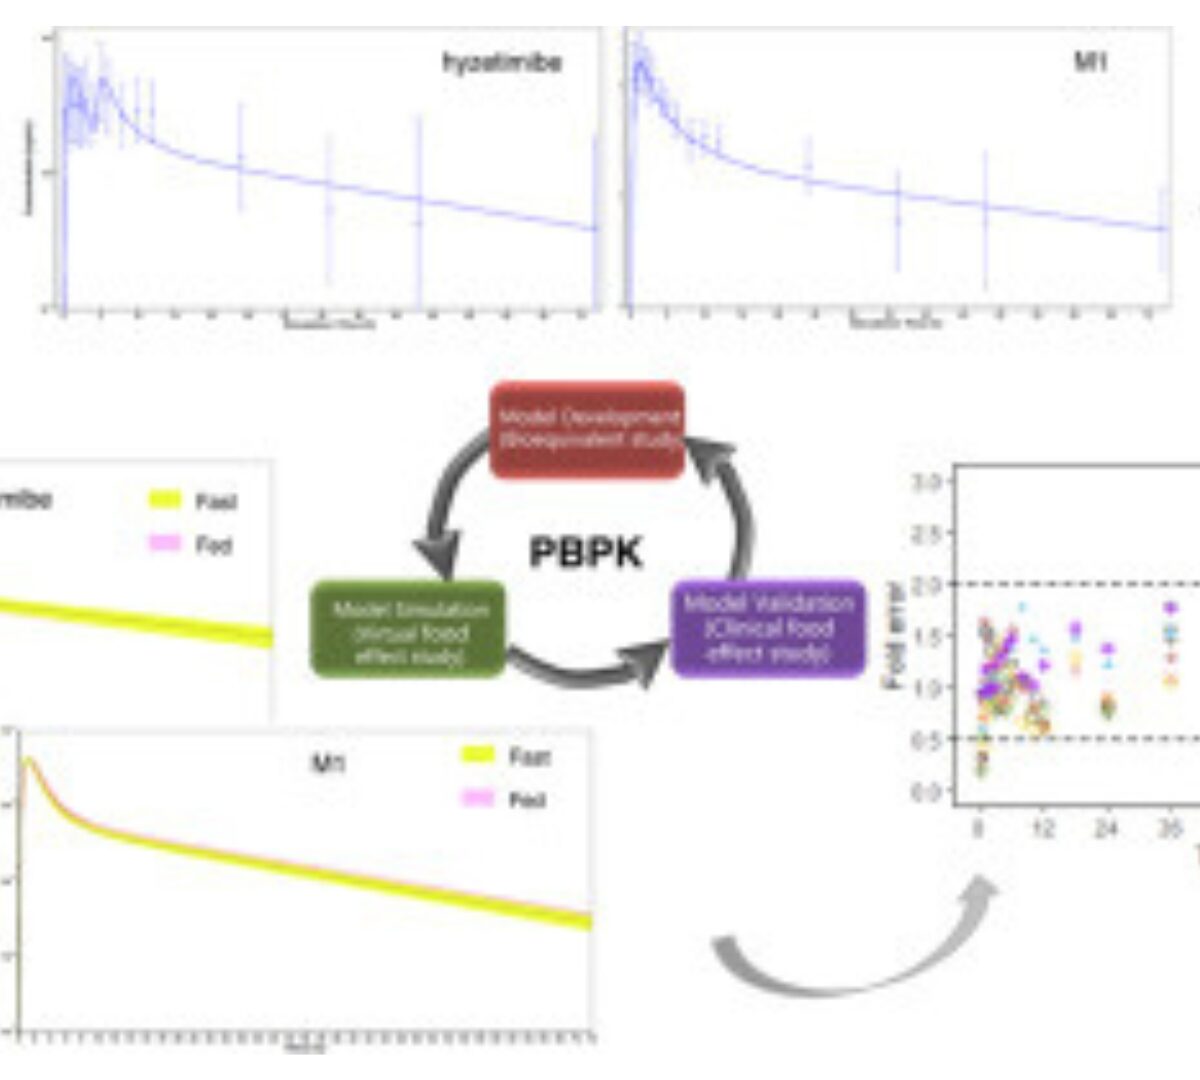 Physiologically based pharmacokinetic modeling to characterize enterohepatic recirculation and predict food effect on the pharmacokinetics of hyzetimibe